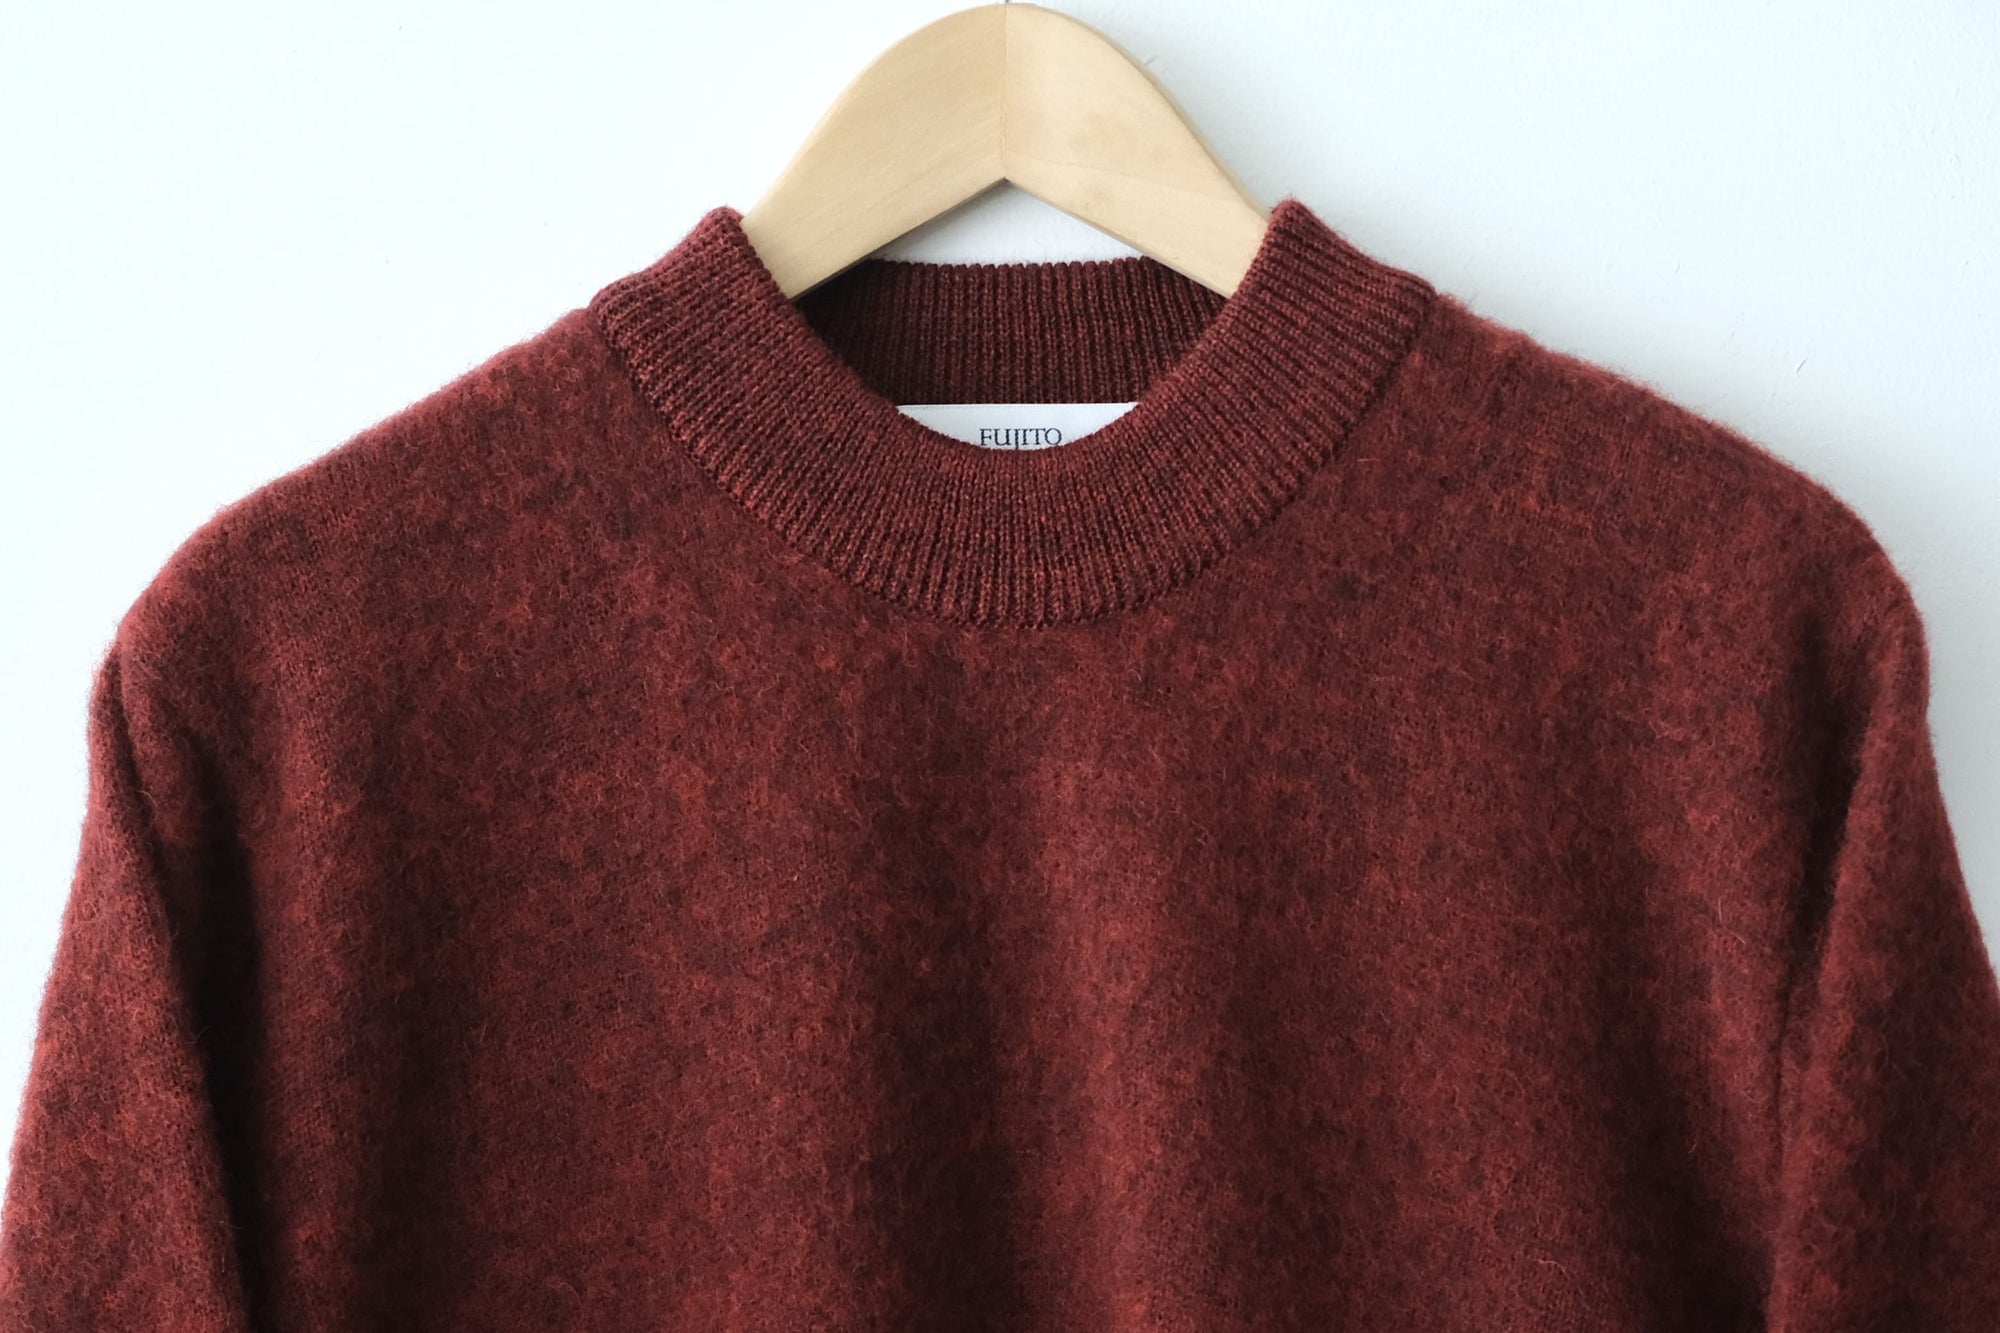 C/N Knit Sweater - Wine Red